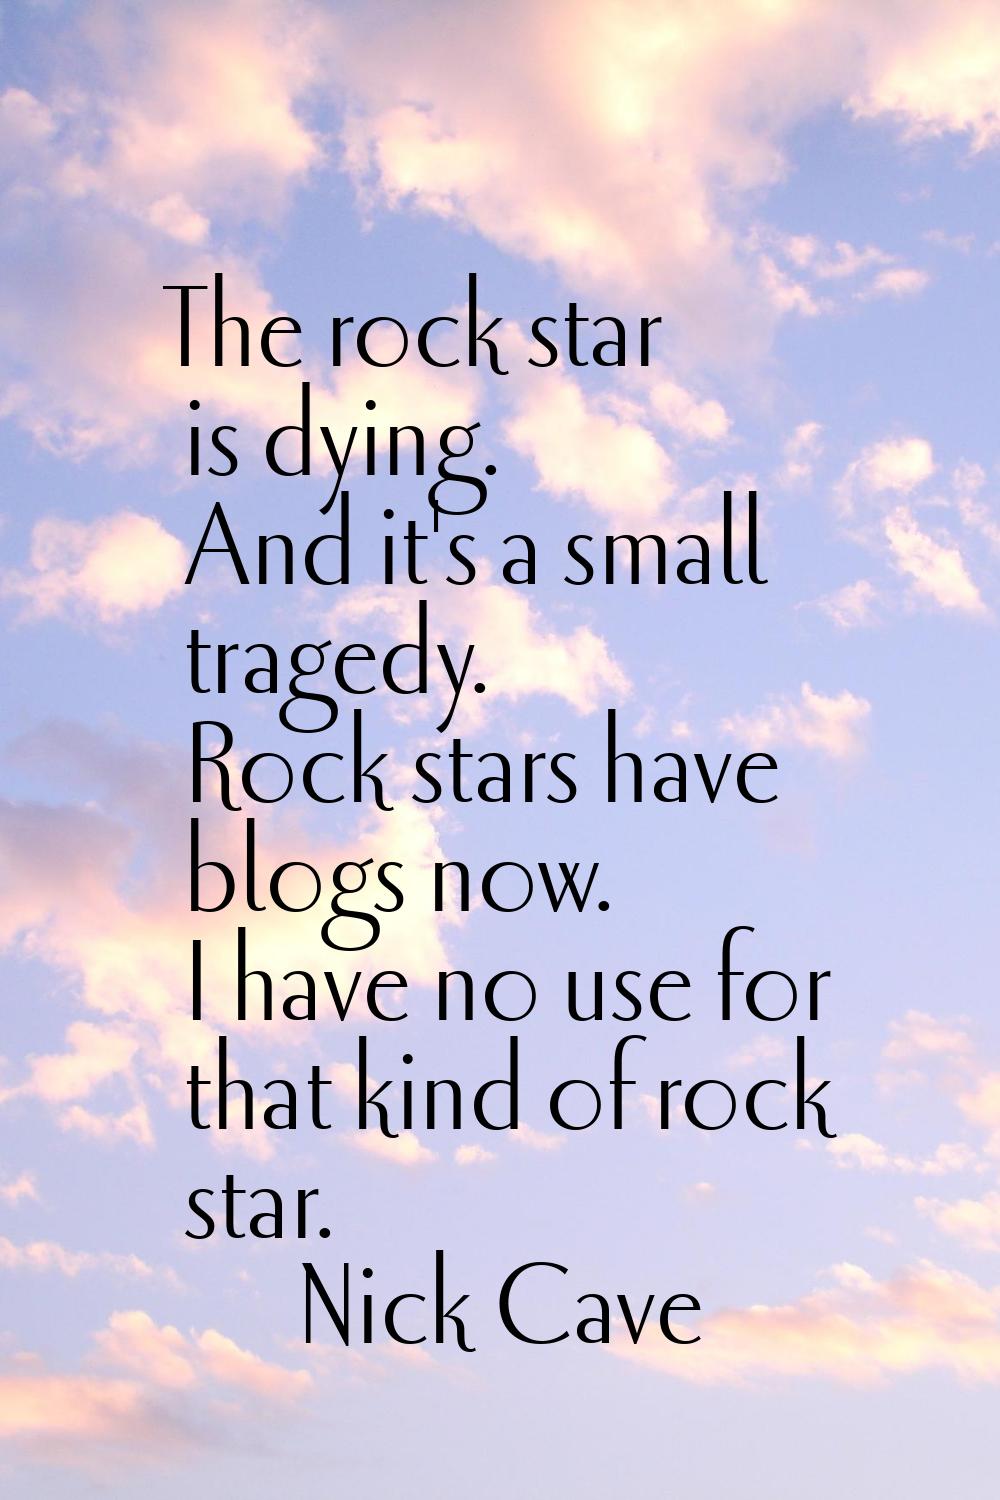 The rock star is dying. And it's a small tragedy. Rock stars have blogs now. I have no use for that